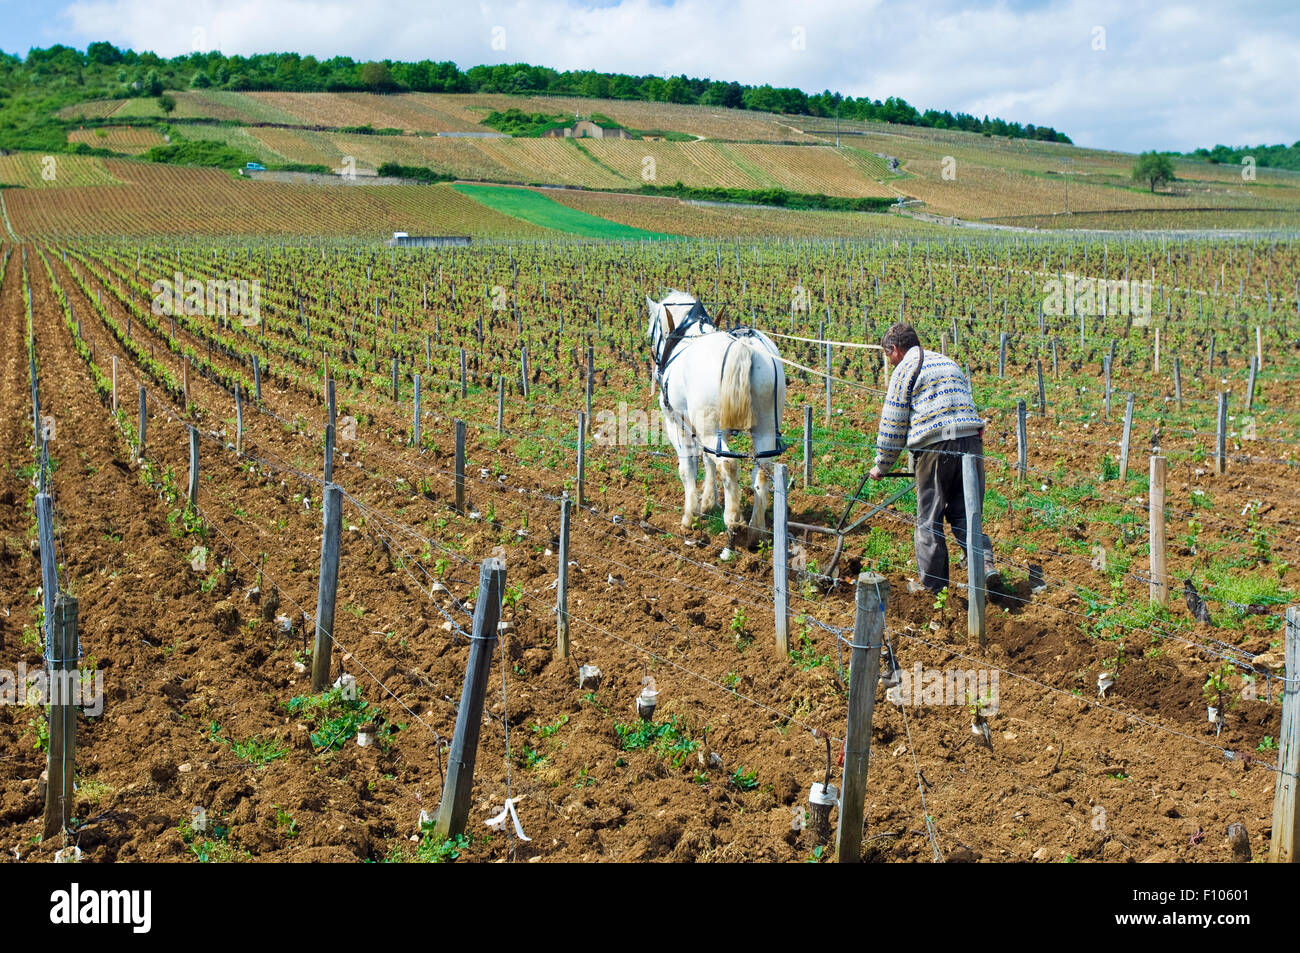 Draft horse and man tilling soil in the La Tache vineyard in Burgundy Stock Photo